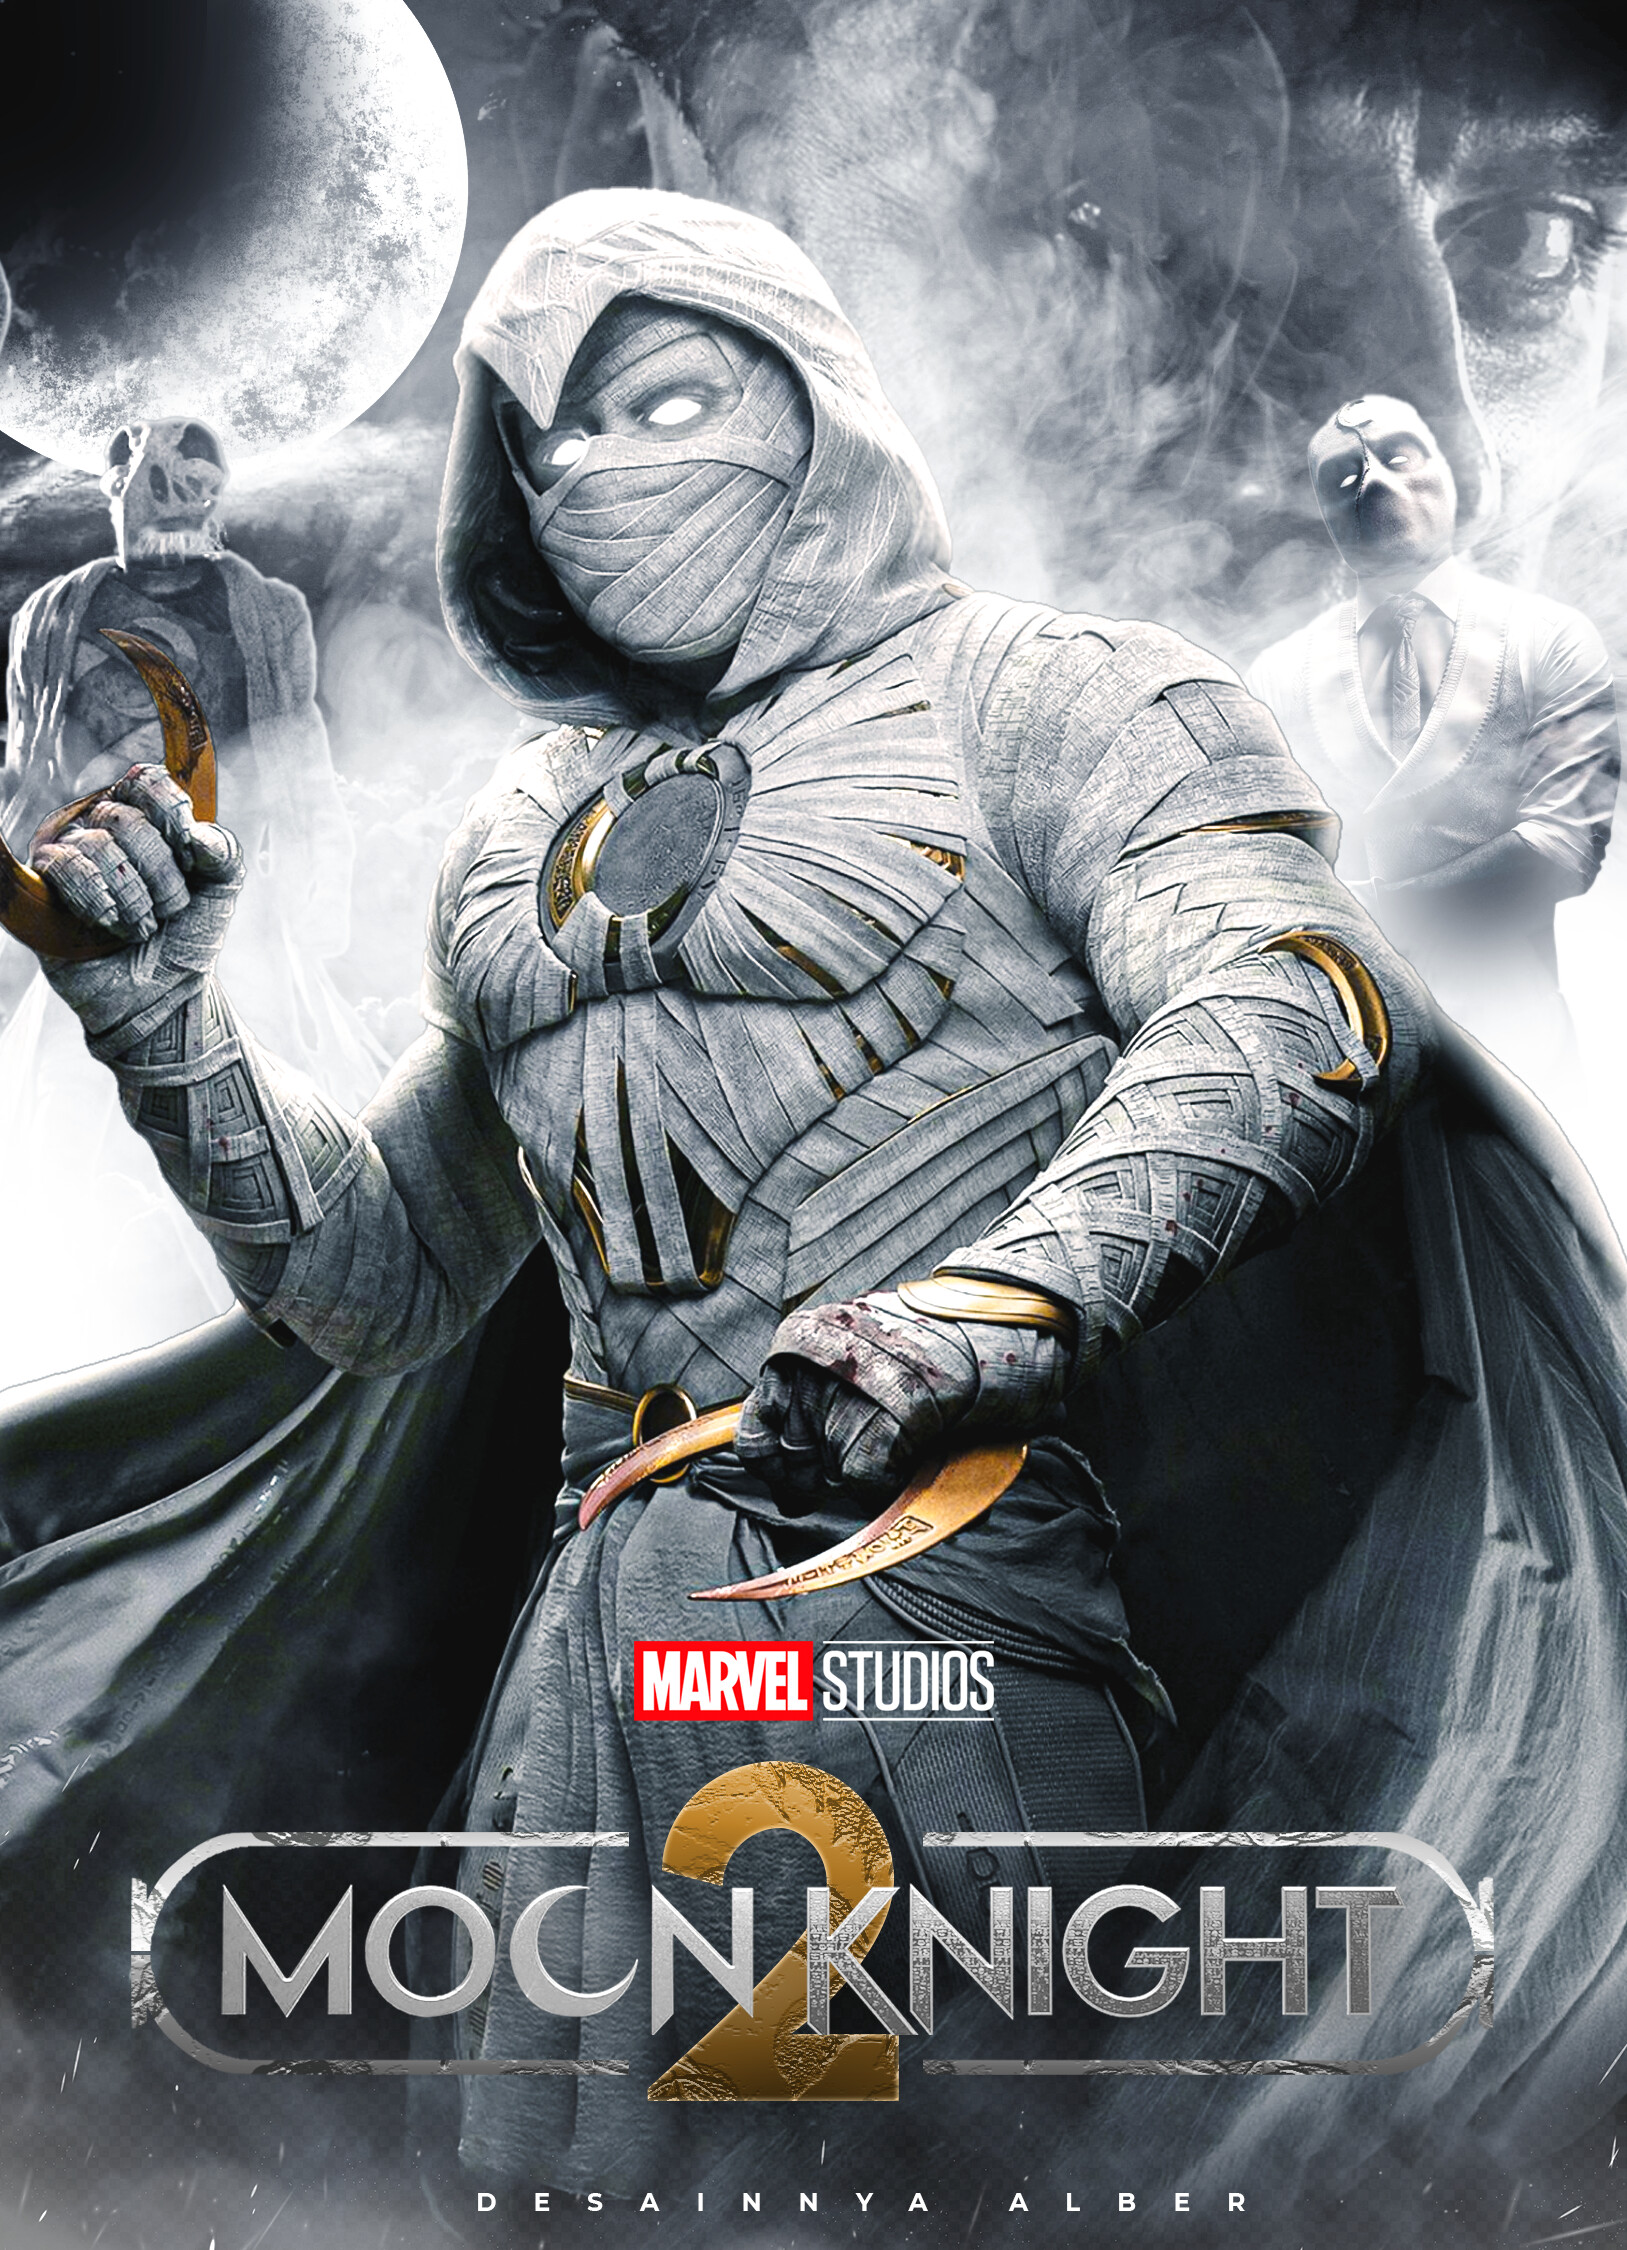 𝐌𝐂𝐔❤️ on Instagram: Moon Knight Season 2 🌙 Concept Poster by  @agtdesign (Fan art) What are your expectations for the second season of Moon  Knight? @themoonknight @marvelmovies #marvel #marvelstudios #posterdesign # moonknight #JonathanMajors #